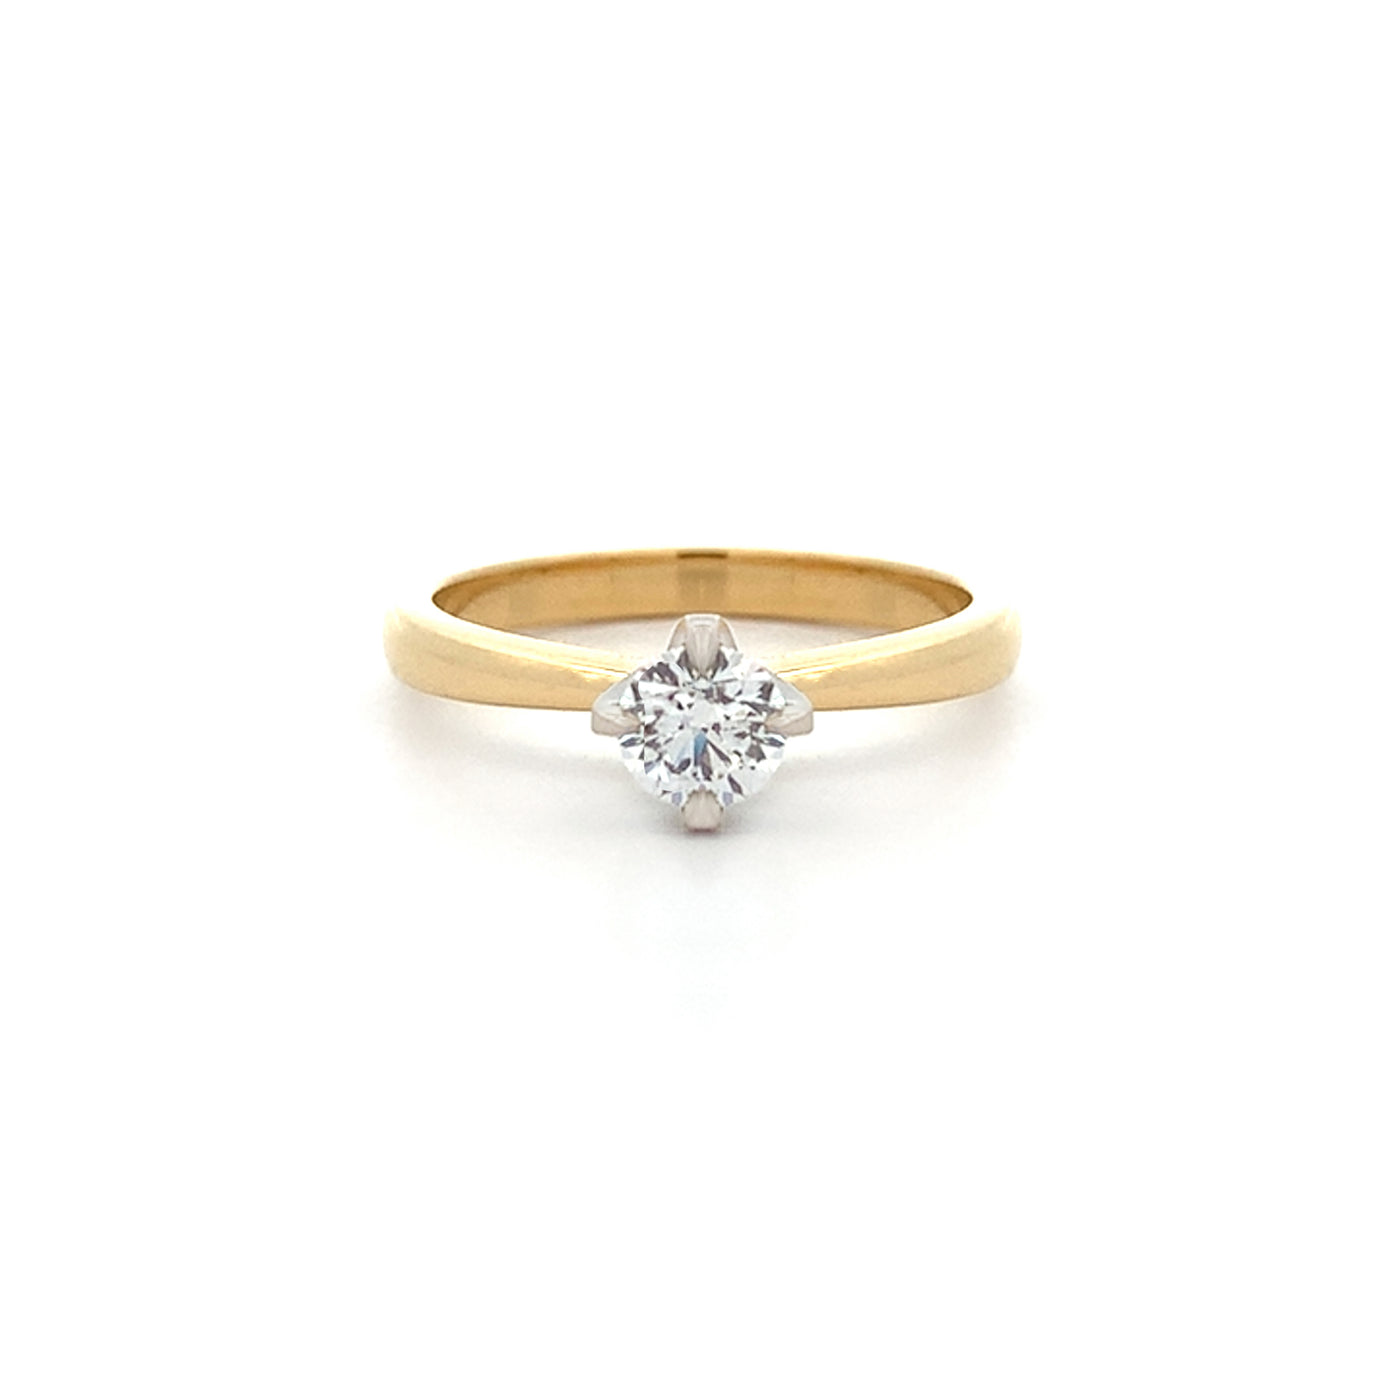 Brilliant Cut Diamond Solitaire Ring in Yellow Gold